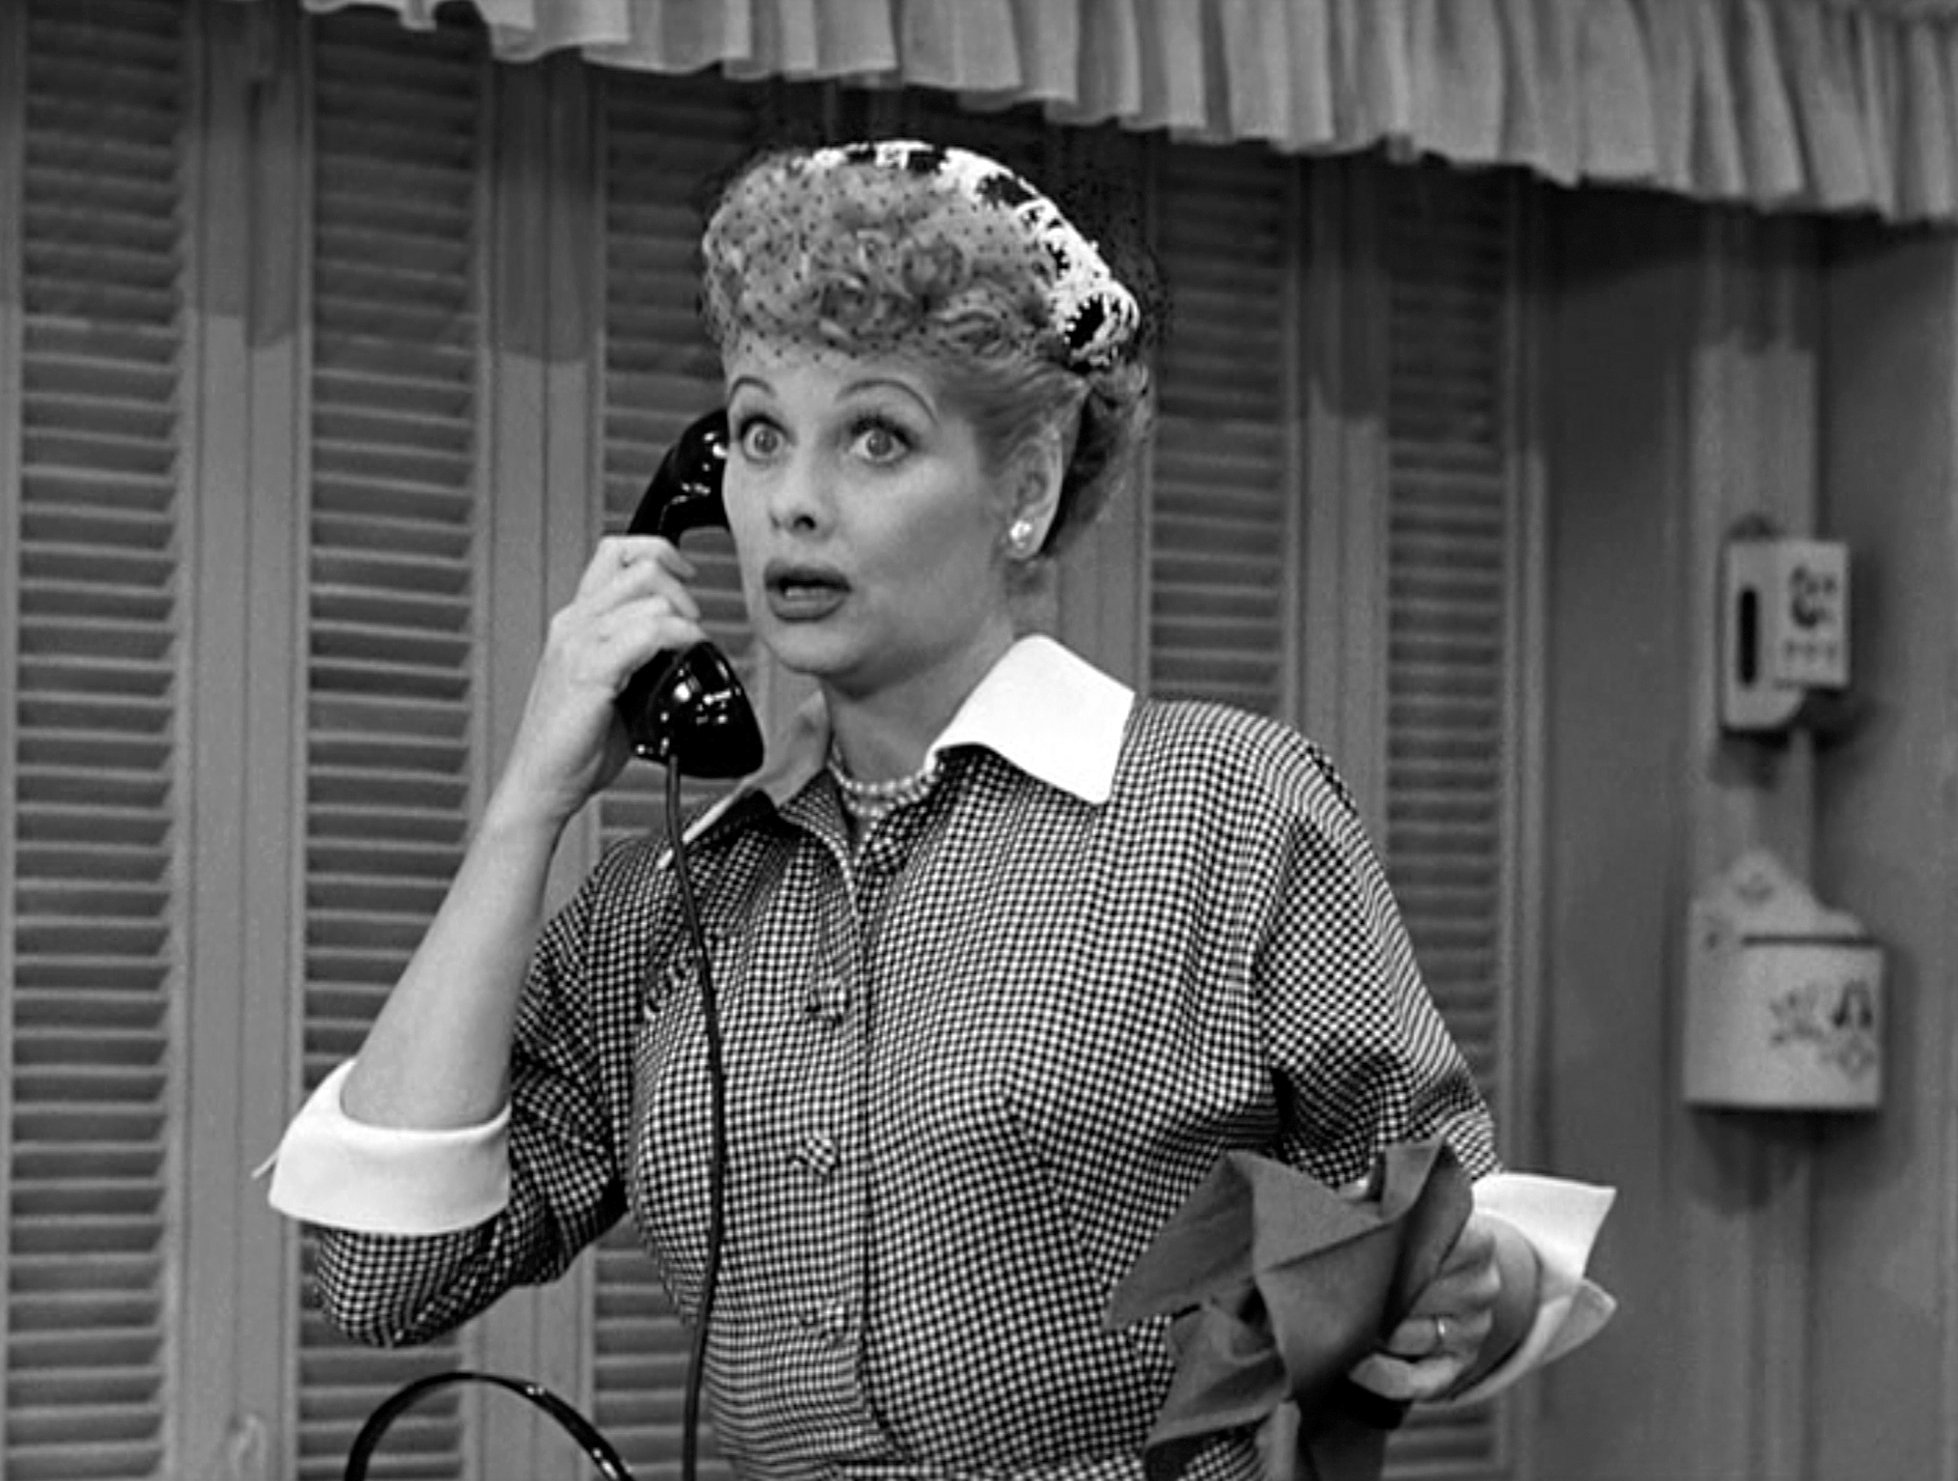 Comedienne Lucille Ball as Lucy Ricardo, talks on the telephone in a scene from an episode of the television comedy 'I Love Lucy'